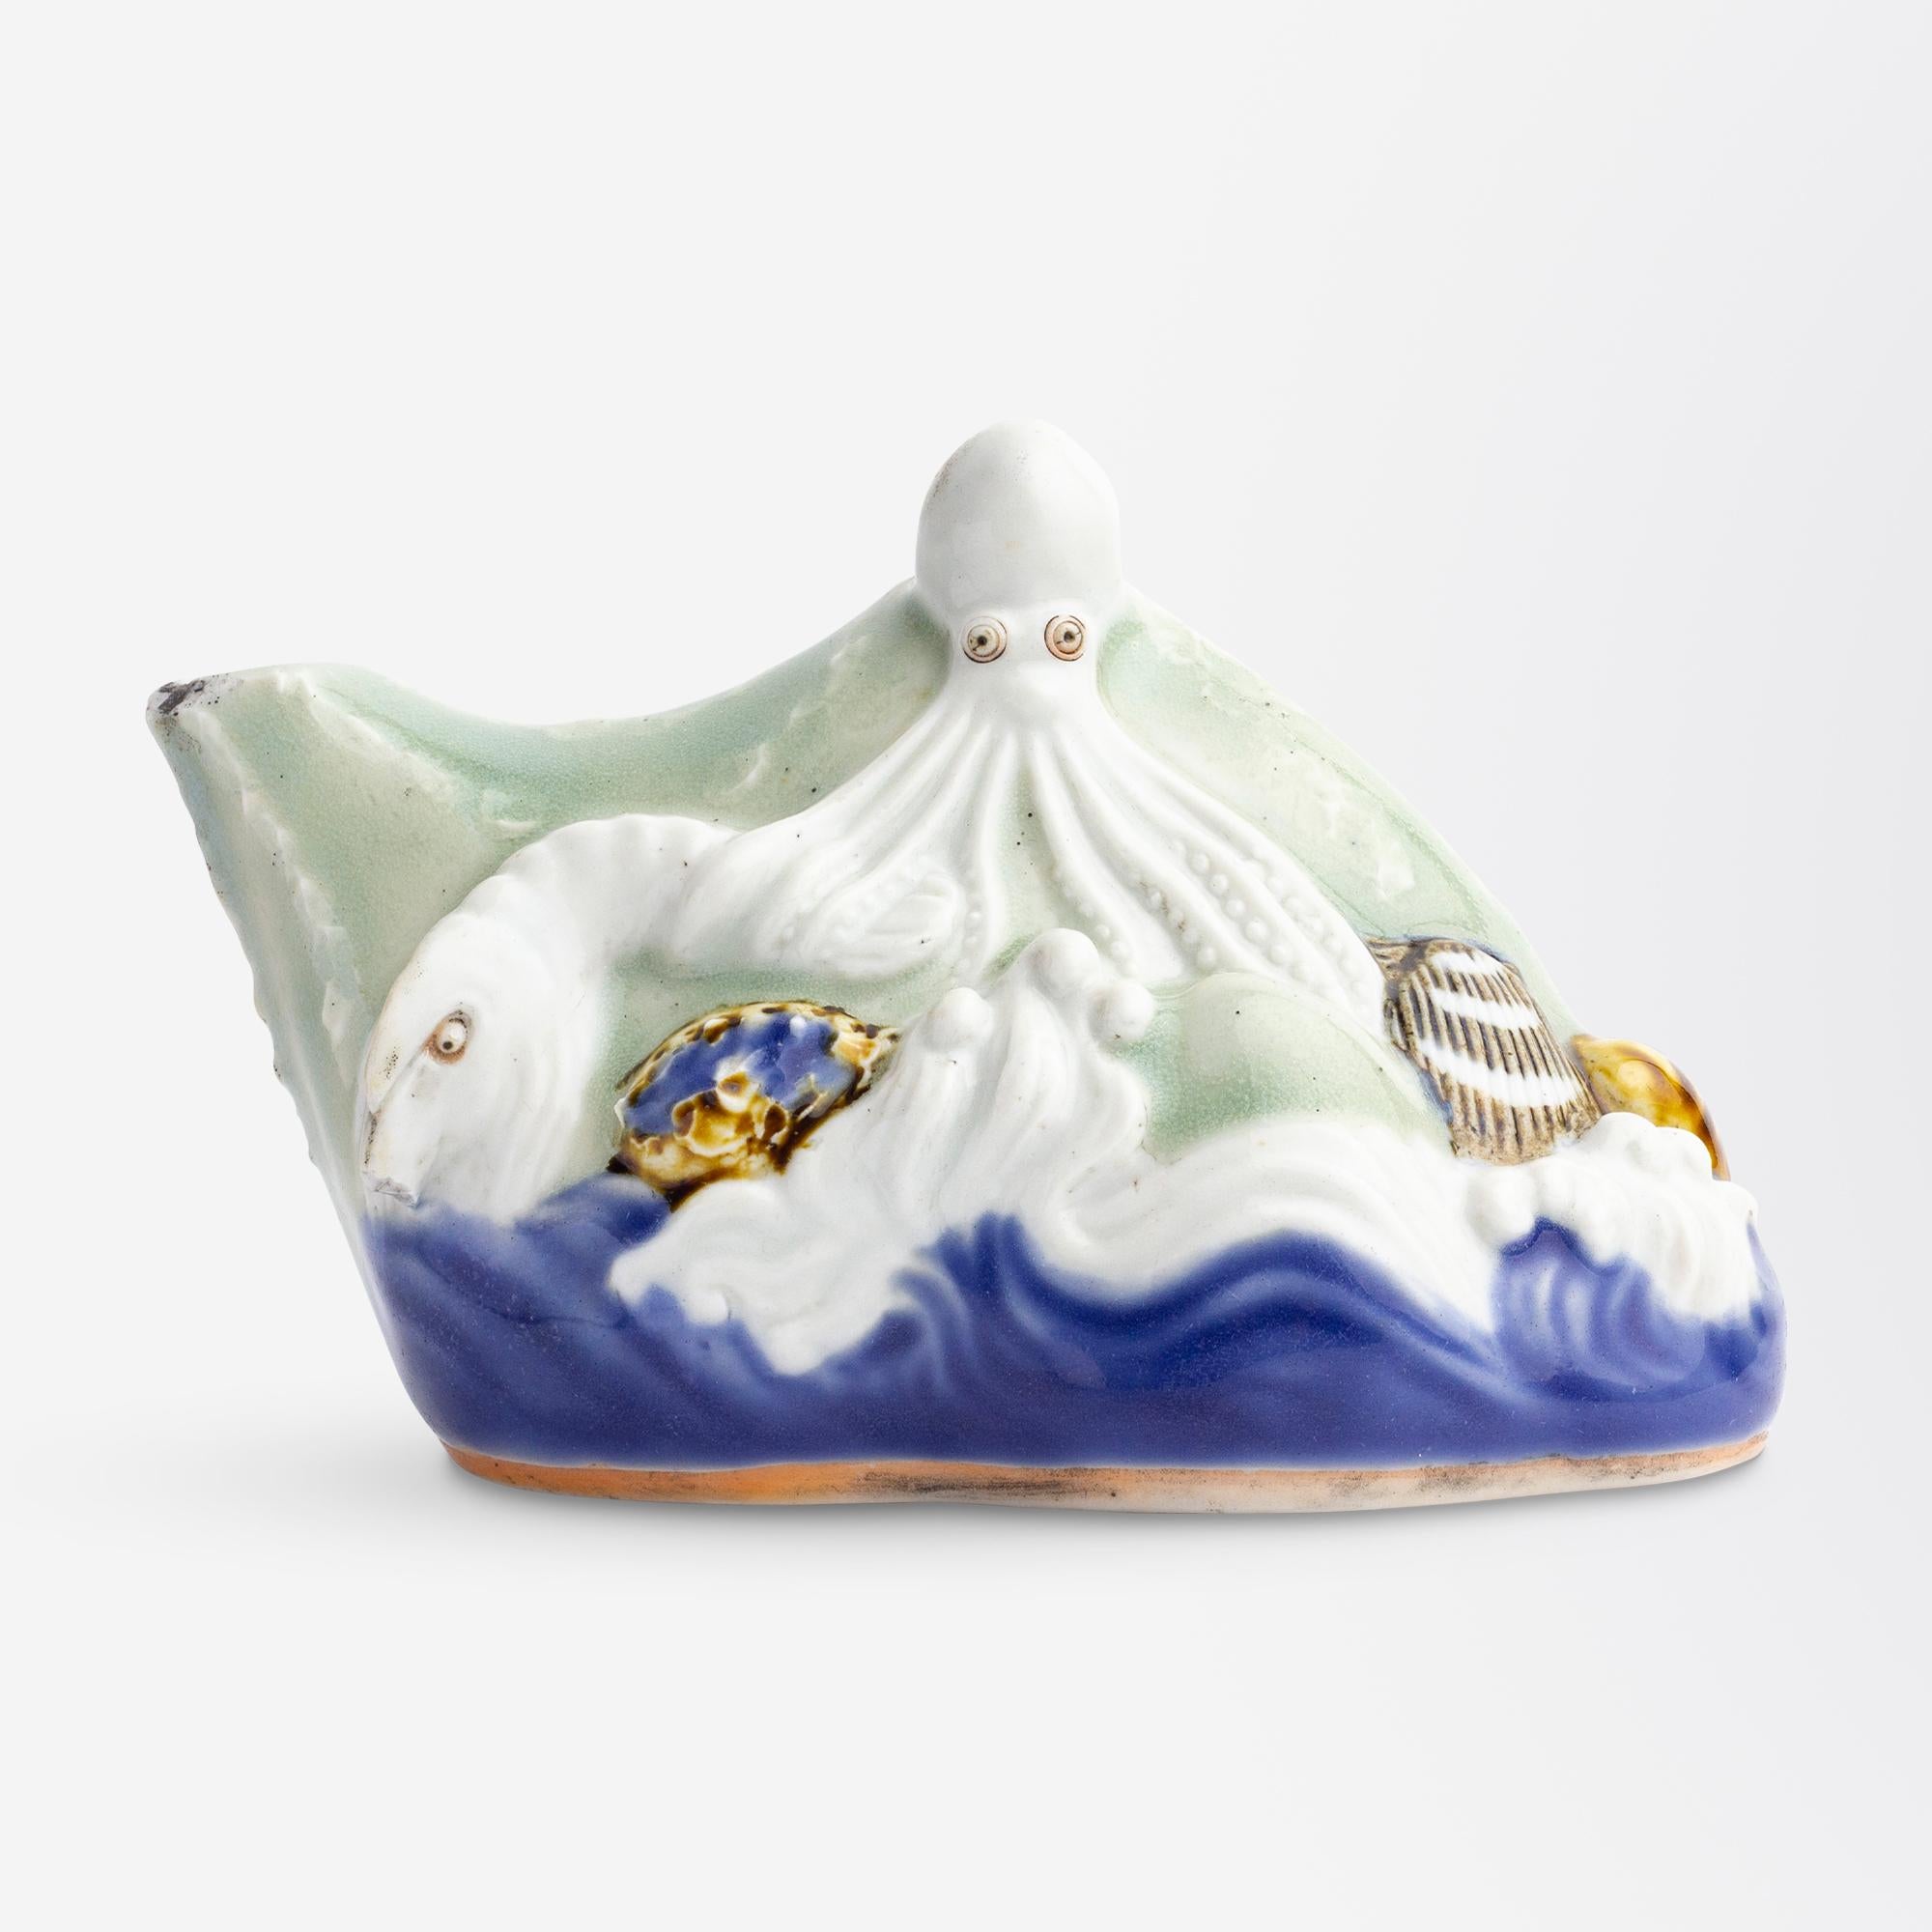 A Japanese Hirado ware water dropper used in calligraphy dating to the Edo Period (1603-1868). The whimsical, molded design features an array of sea creatures and shells on the base of crashing waves. Crafted from Hirado clay, covered in celadon